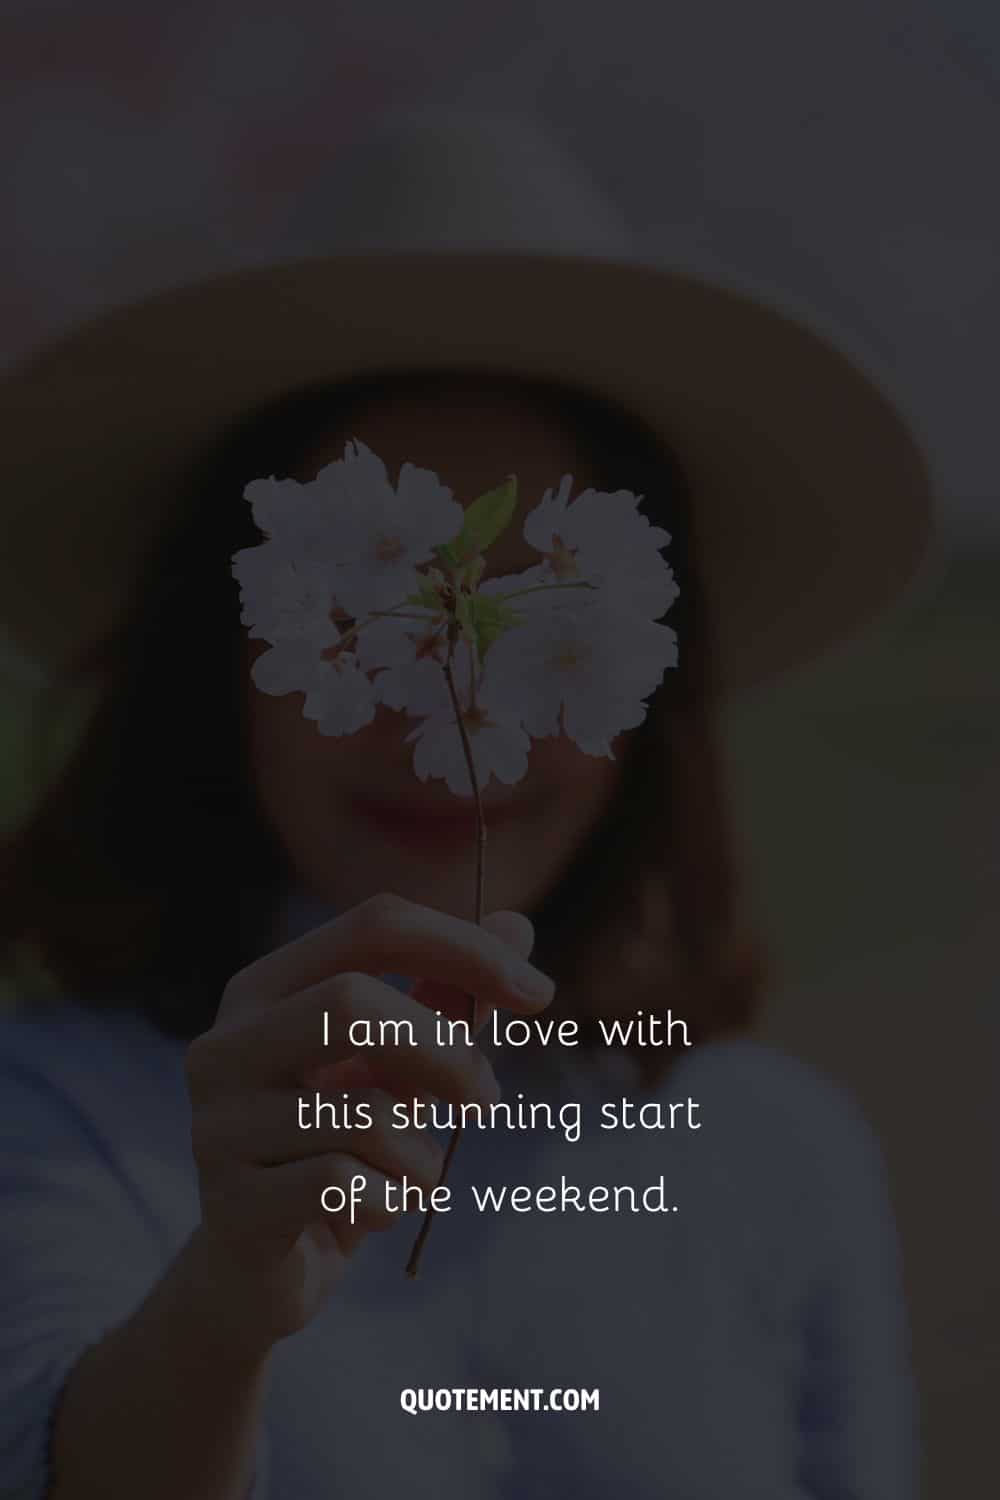 Image of a woman holding a flower representing weekend affirmation